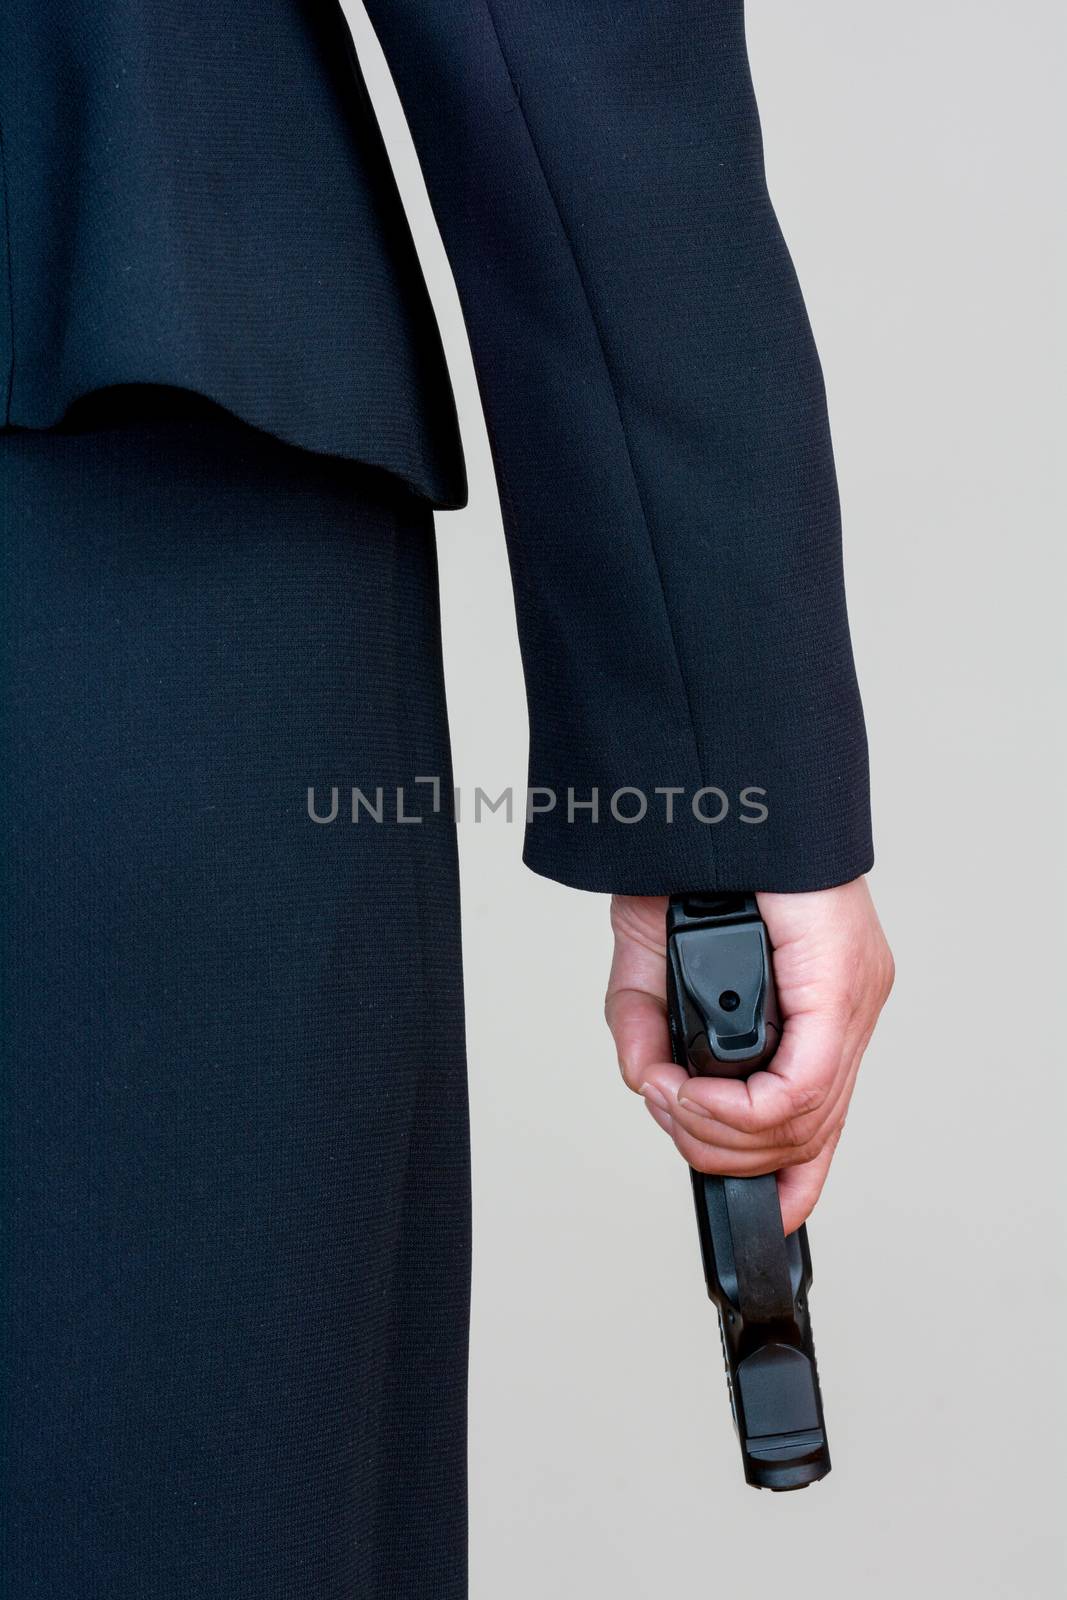 Close up of a the back side of a woman in business suit holding a hand gun